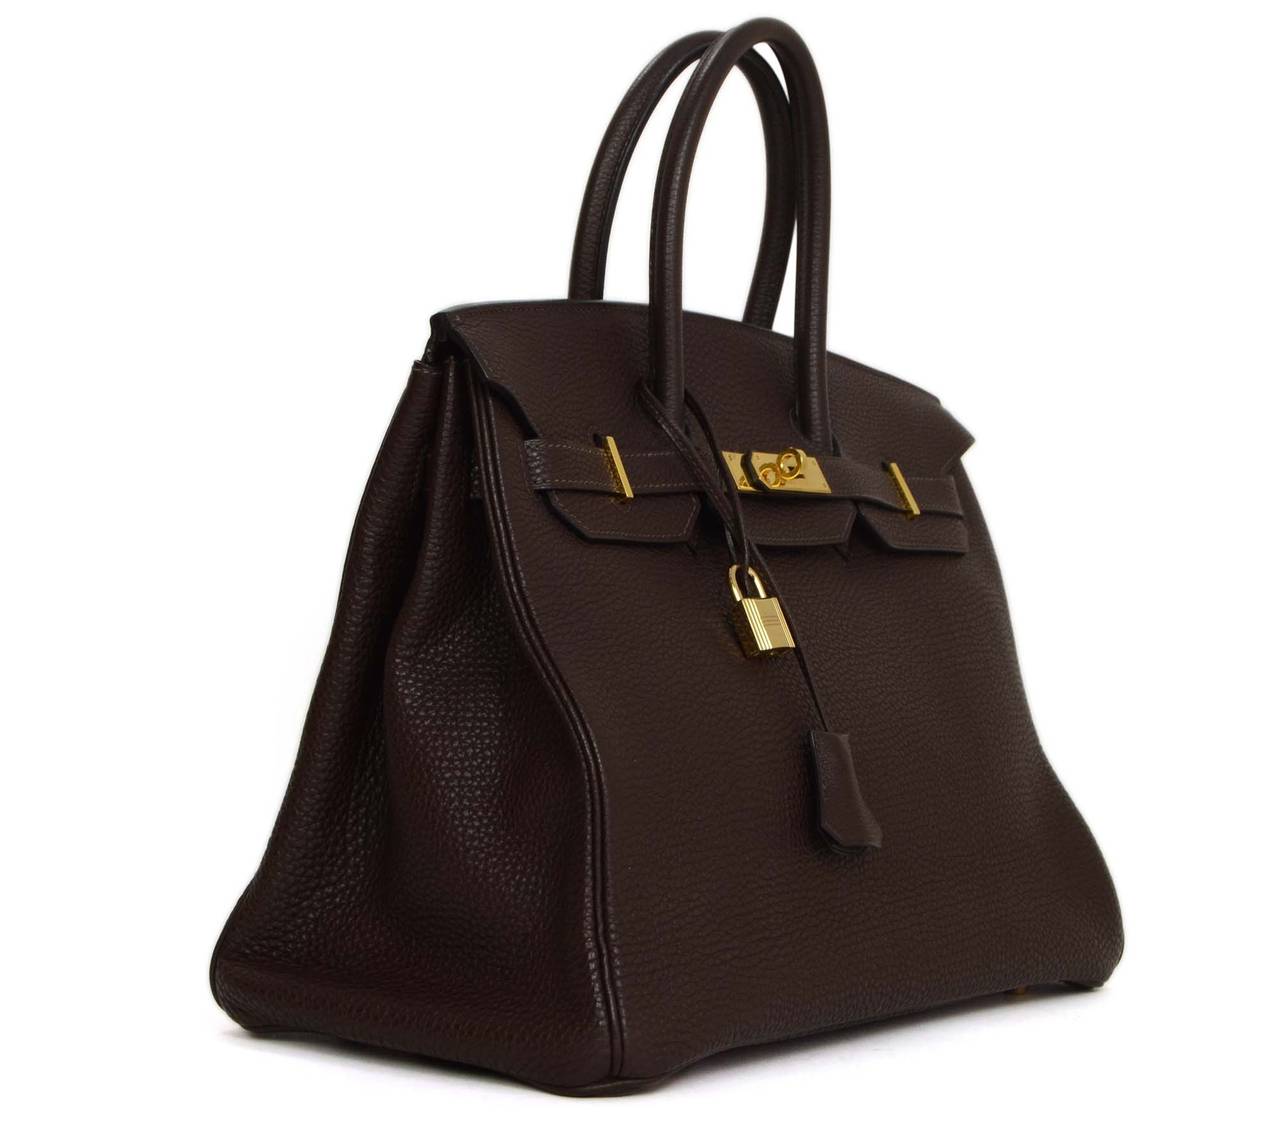 Hermes Brown Togo Leather 35cm Birkin Bag
Features double rolled leather handles
Made in: France
Year of Production: 2003
Color: Brown and goldtone
Hardware: Gold plated
Materials: Togo leather
Lining: Brown, chevre leather
Closure/opening: